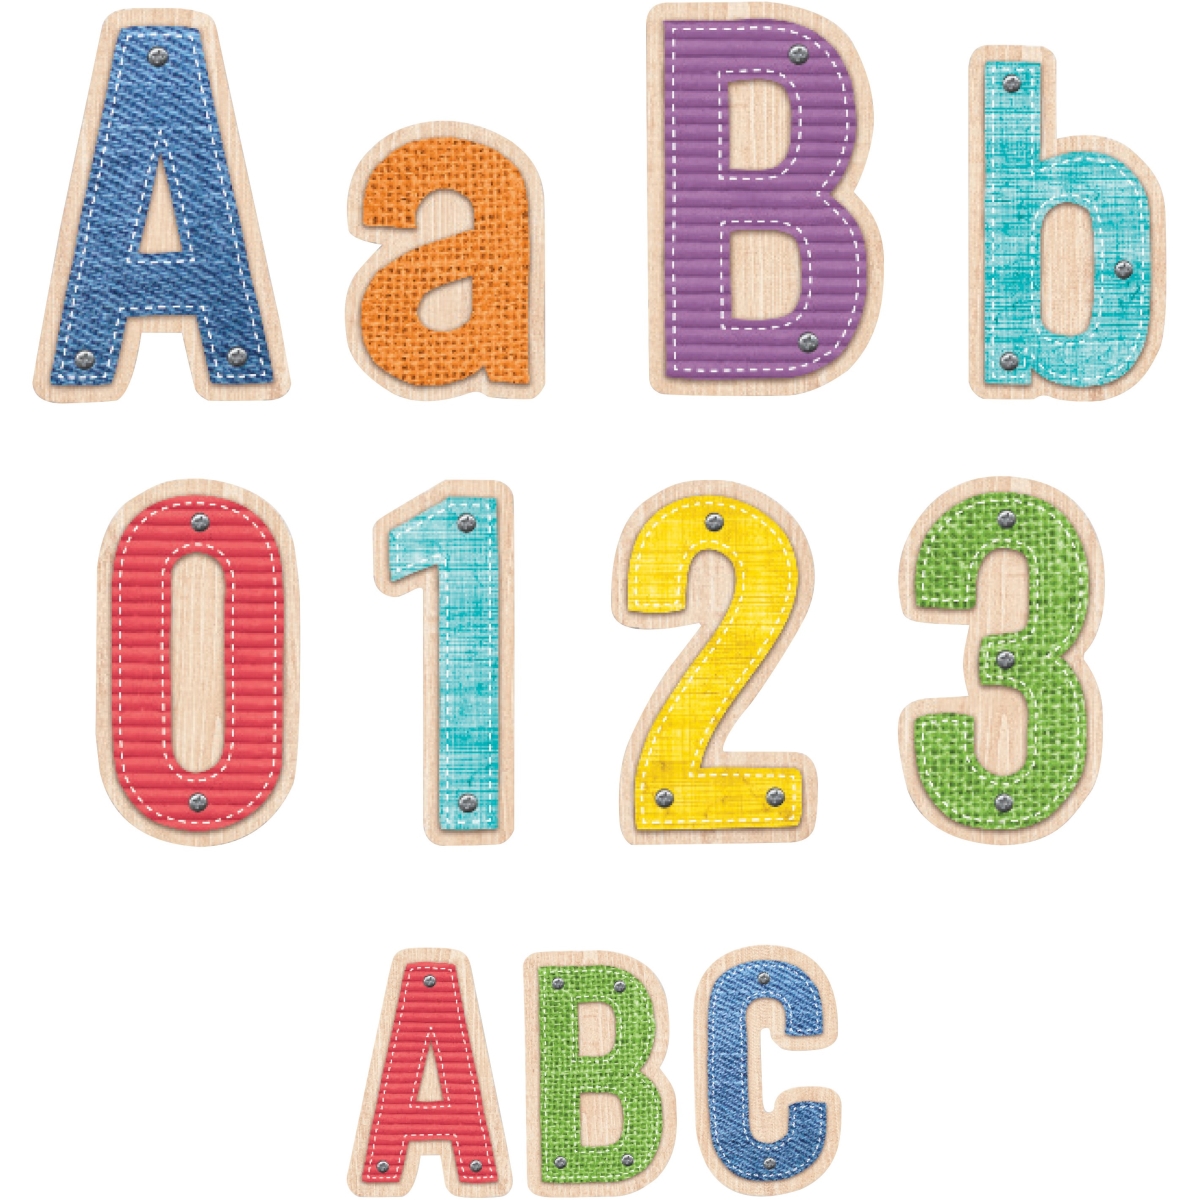 Ctc8914 Upcycle Style Letter Set - Uppercase Letters, Multi Color